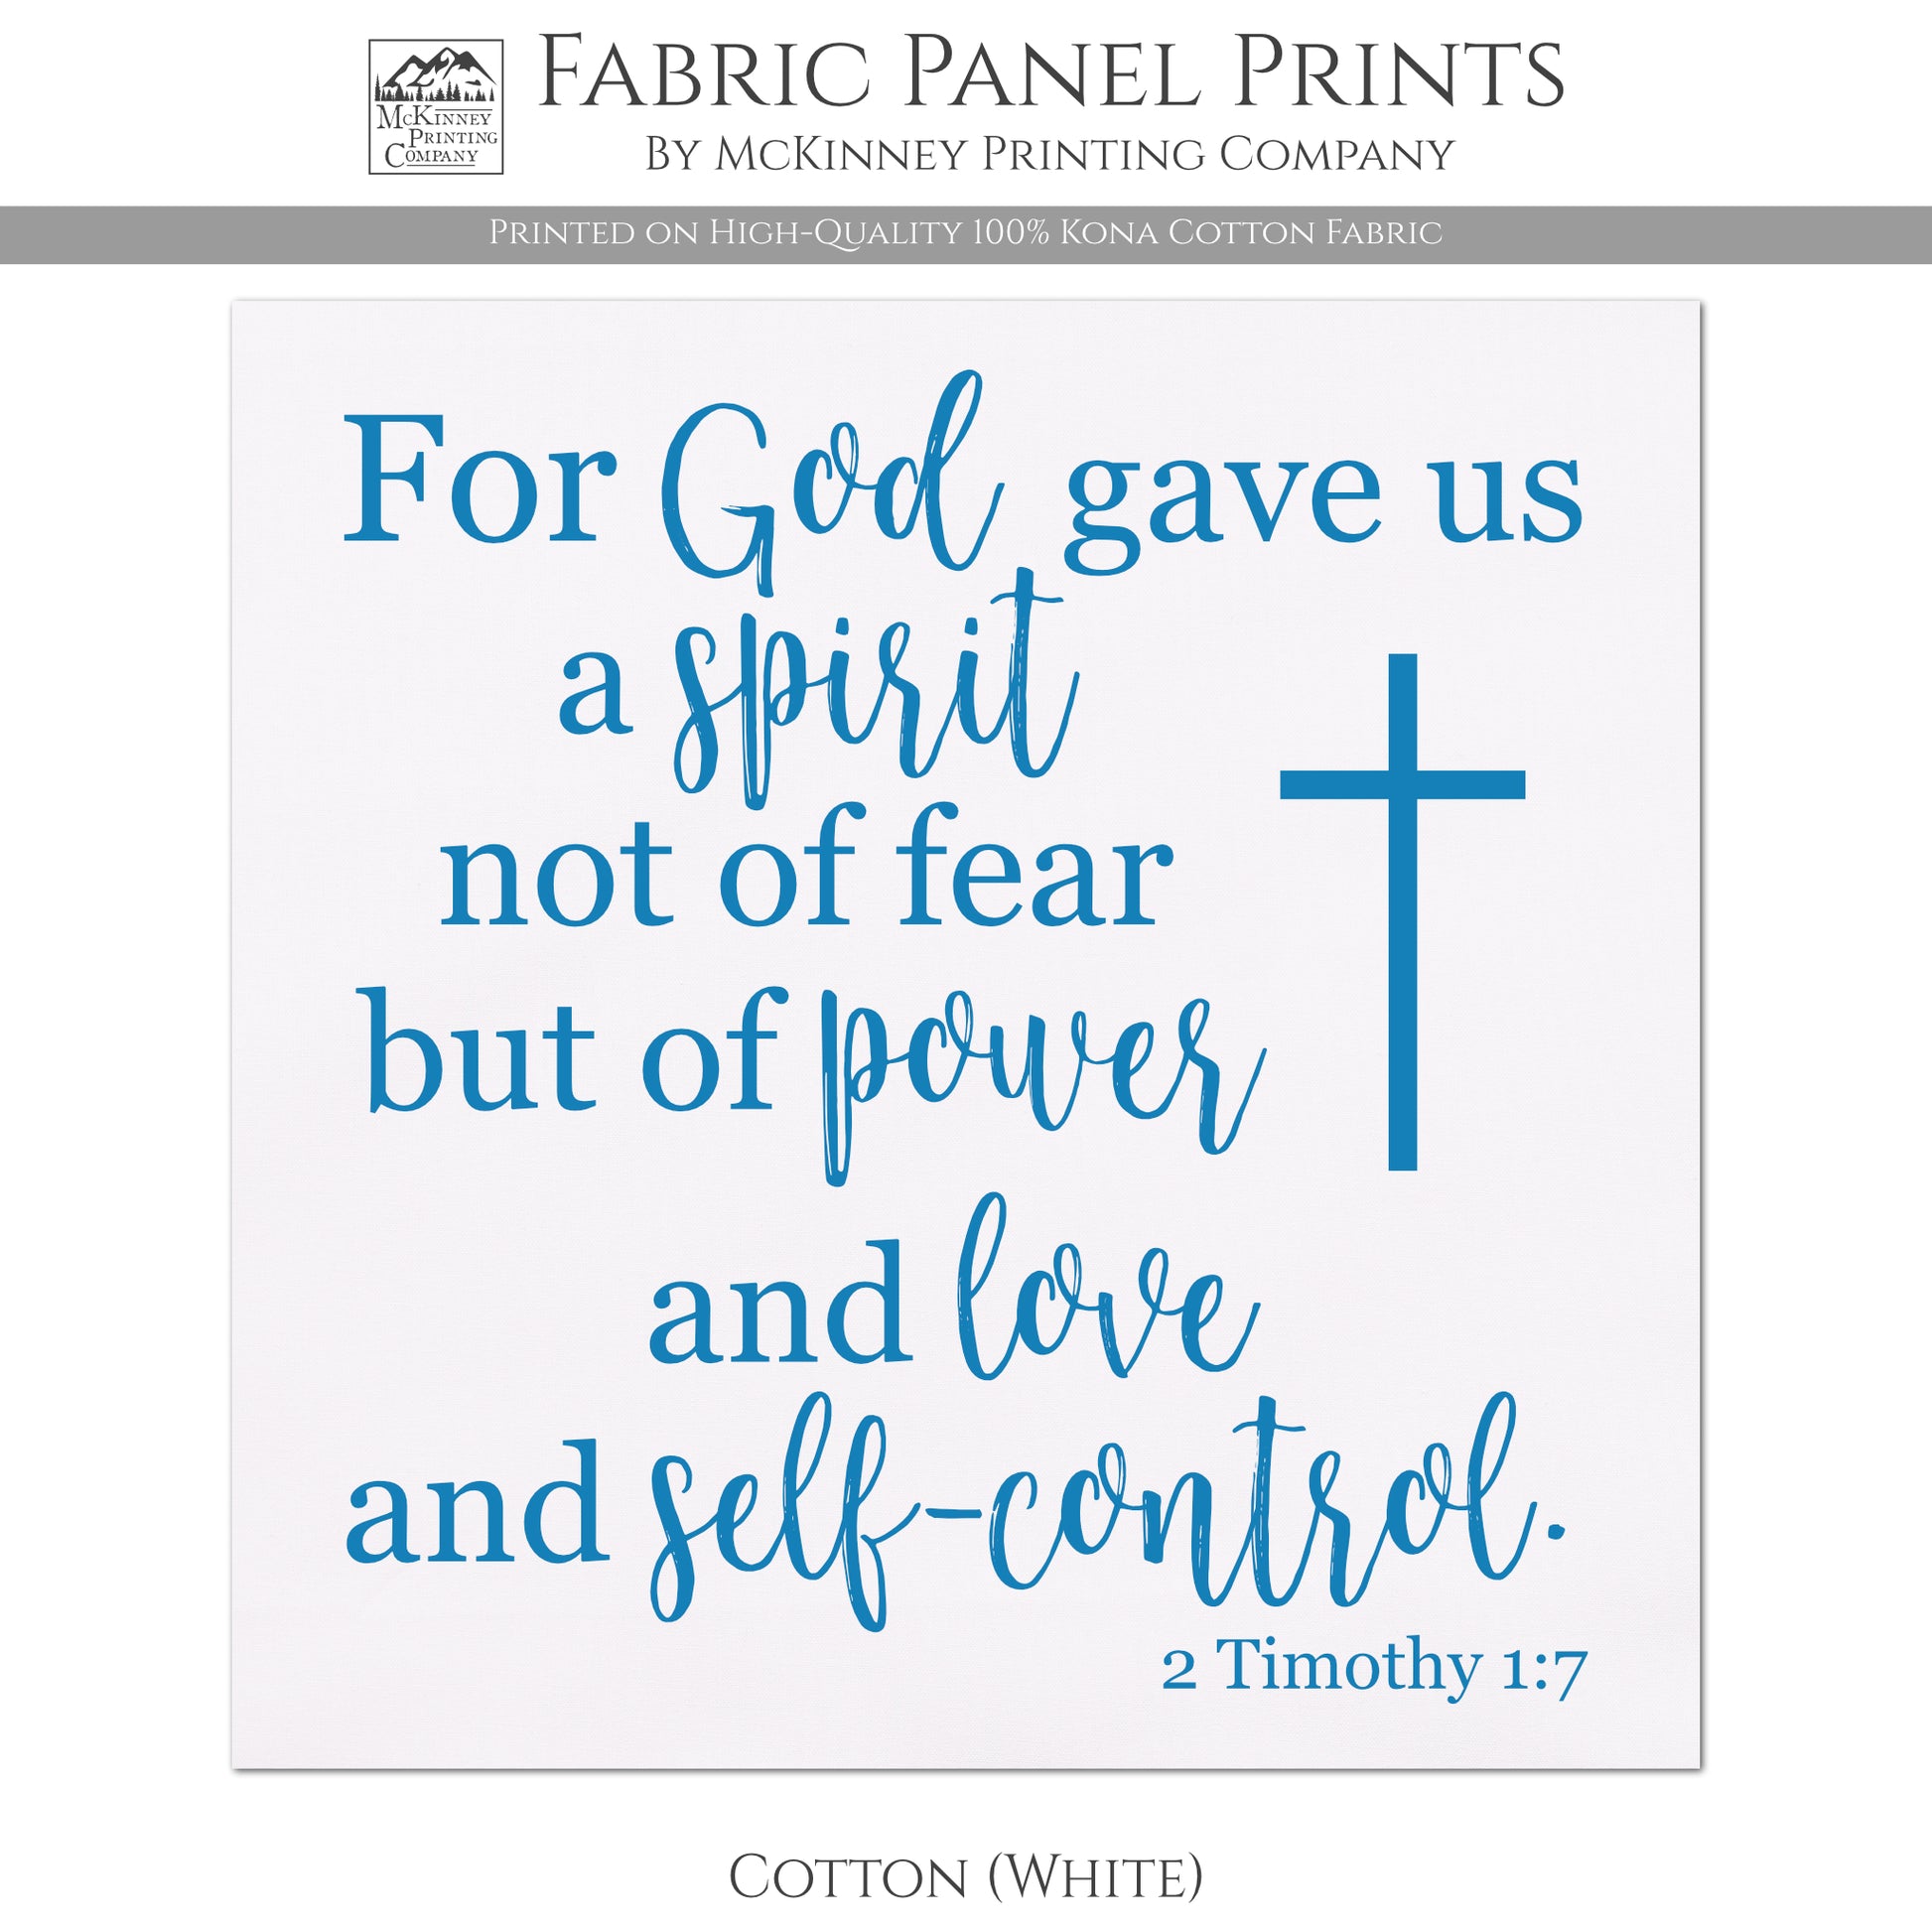 For God gave us a spirit not of fear but of power and love and self-control - 2 Timothy 1 7 - Fabric Panel Print - Kona Cotton Fabric, White